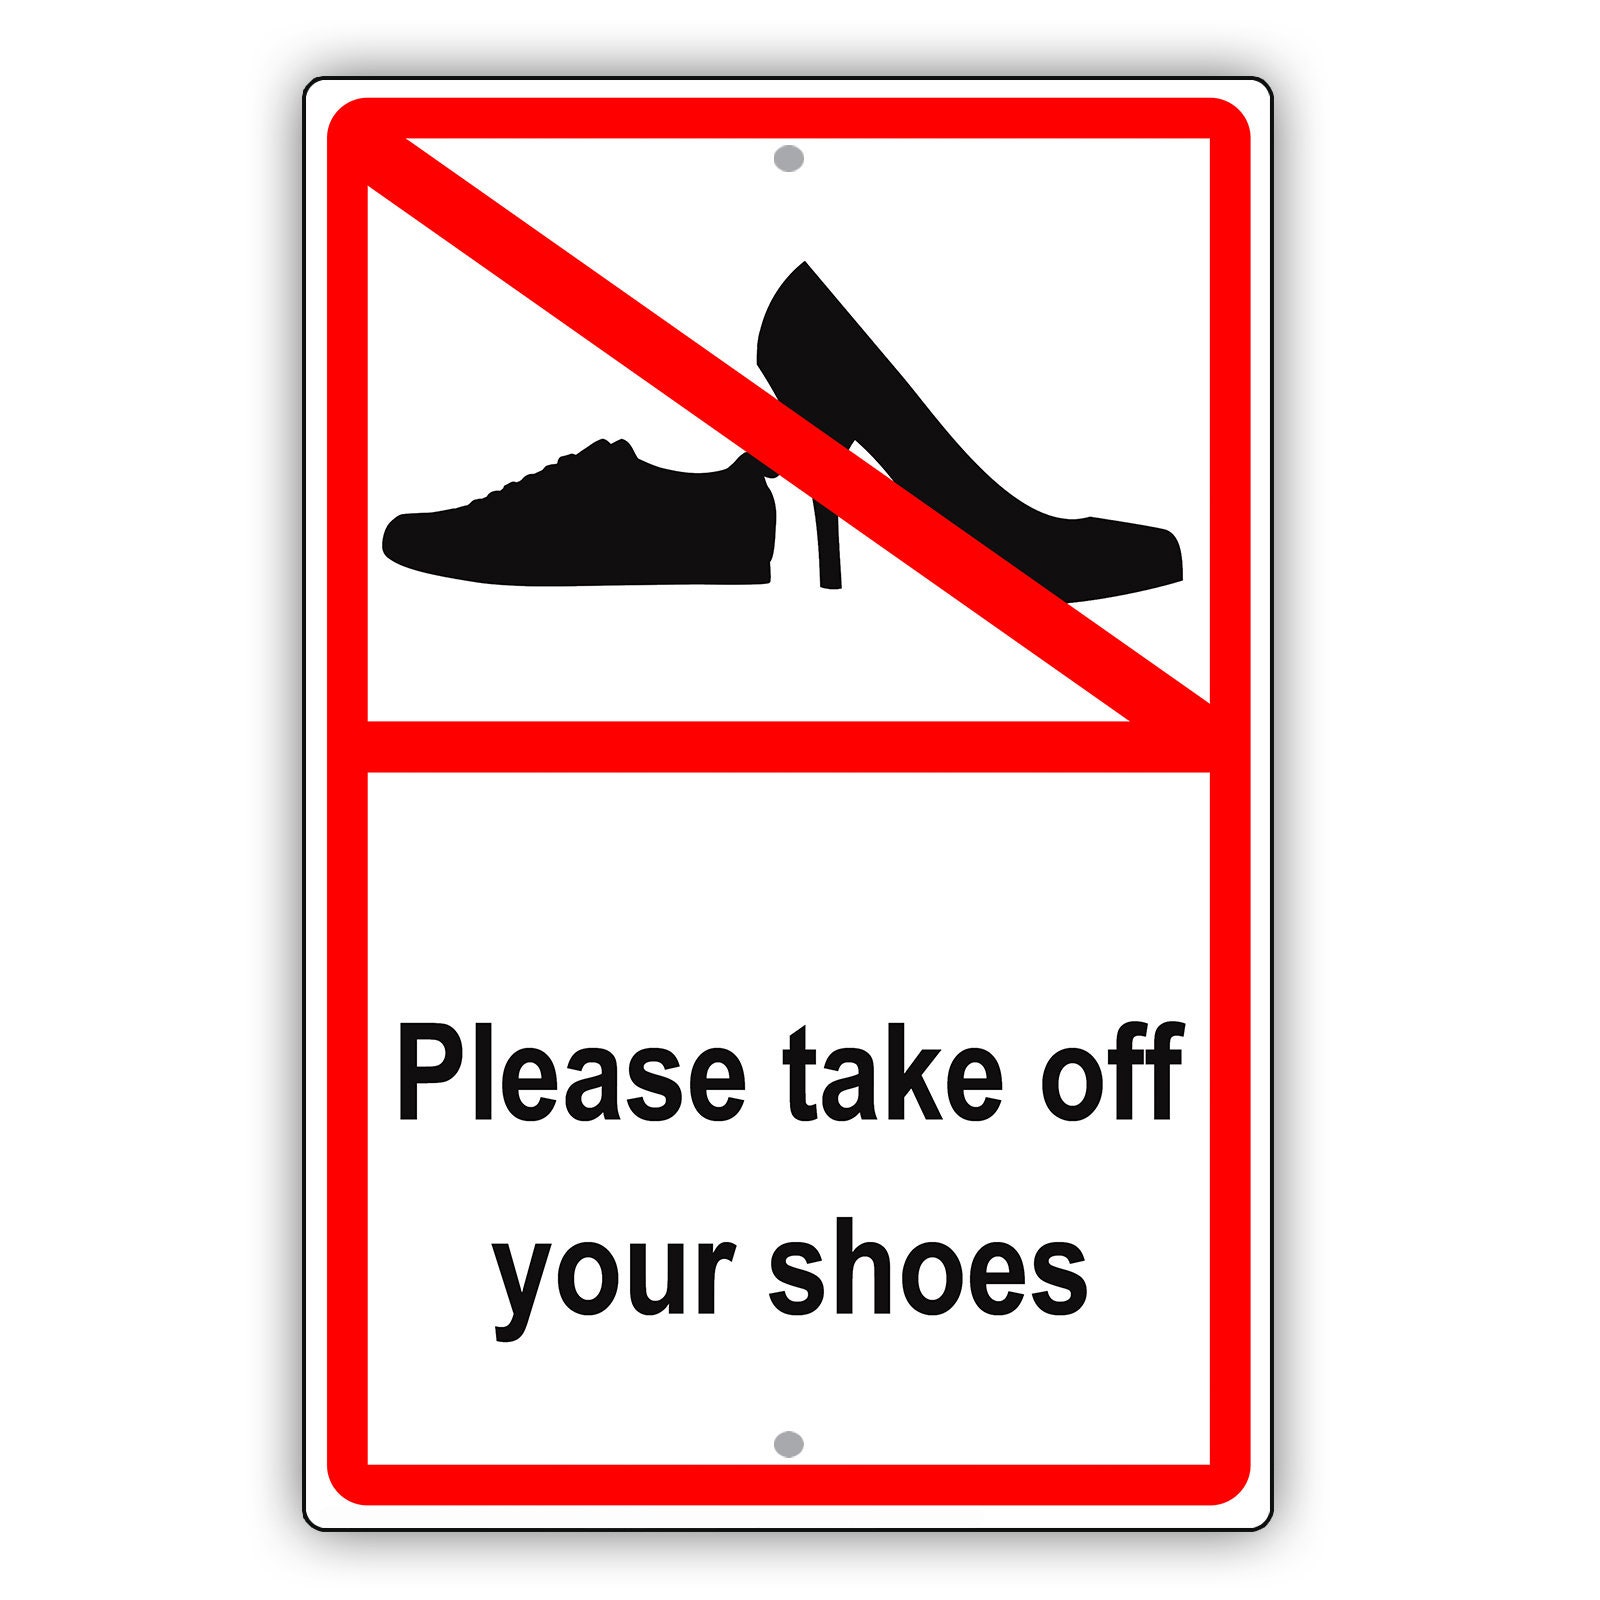 Love take off. Please take off your Shoes. Take off Shoes. Take off картинка. Обувь off keep.